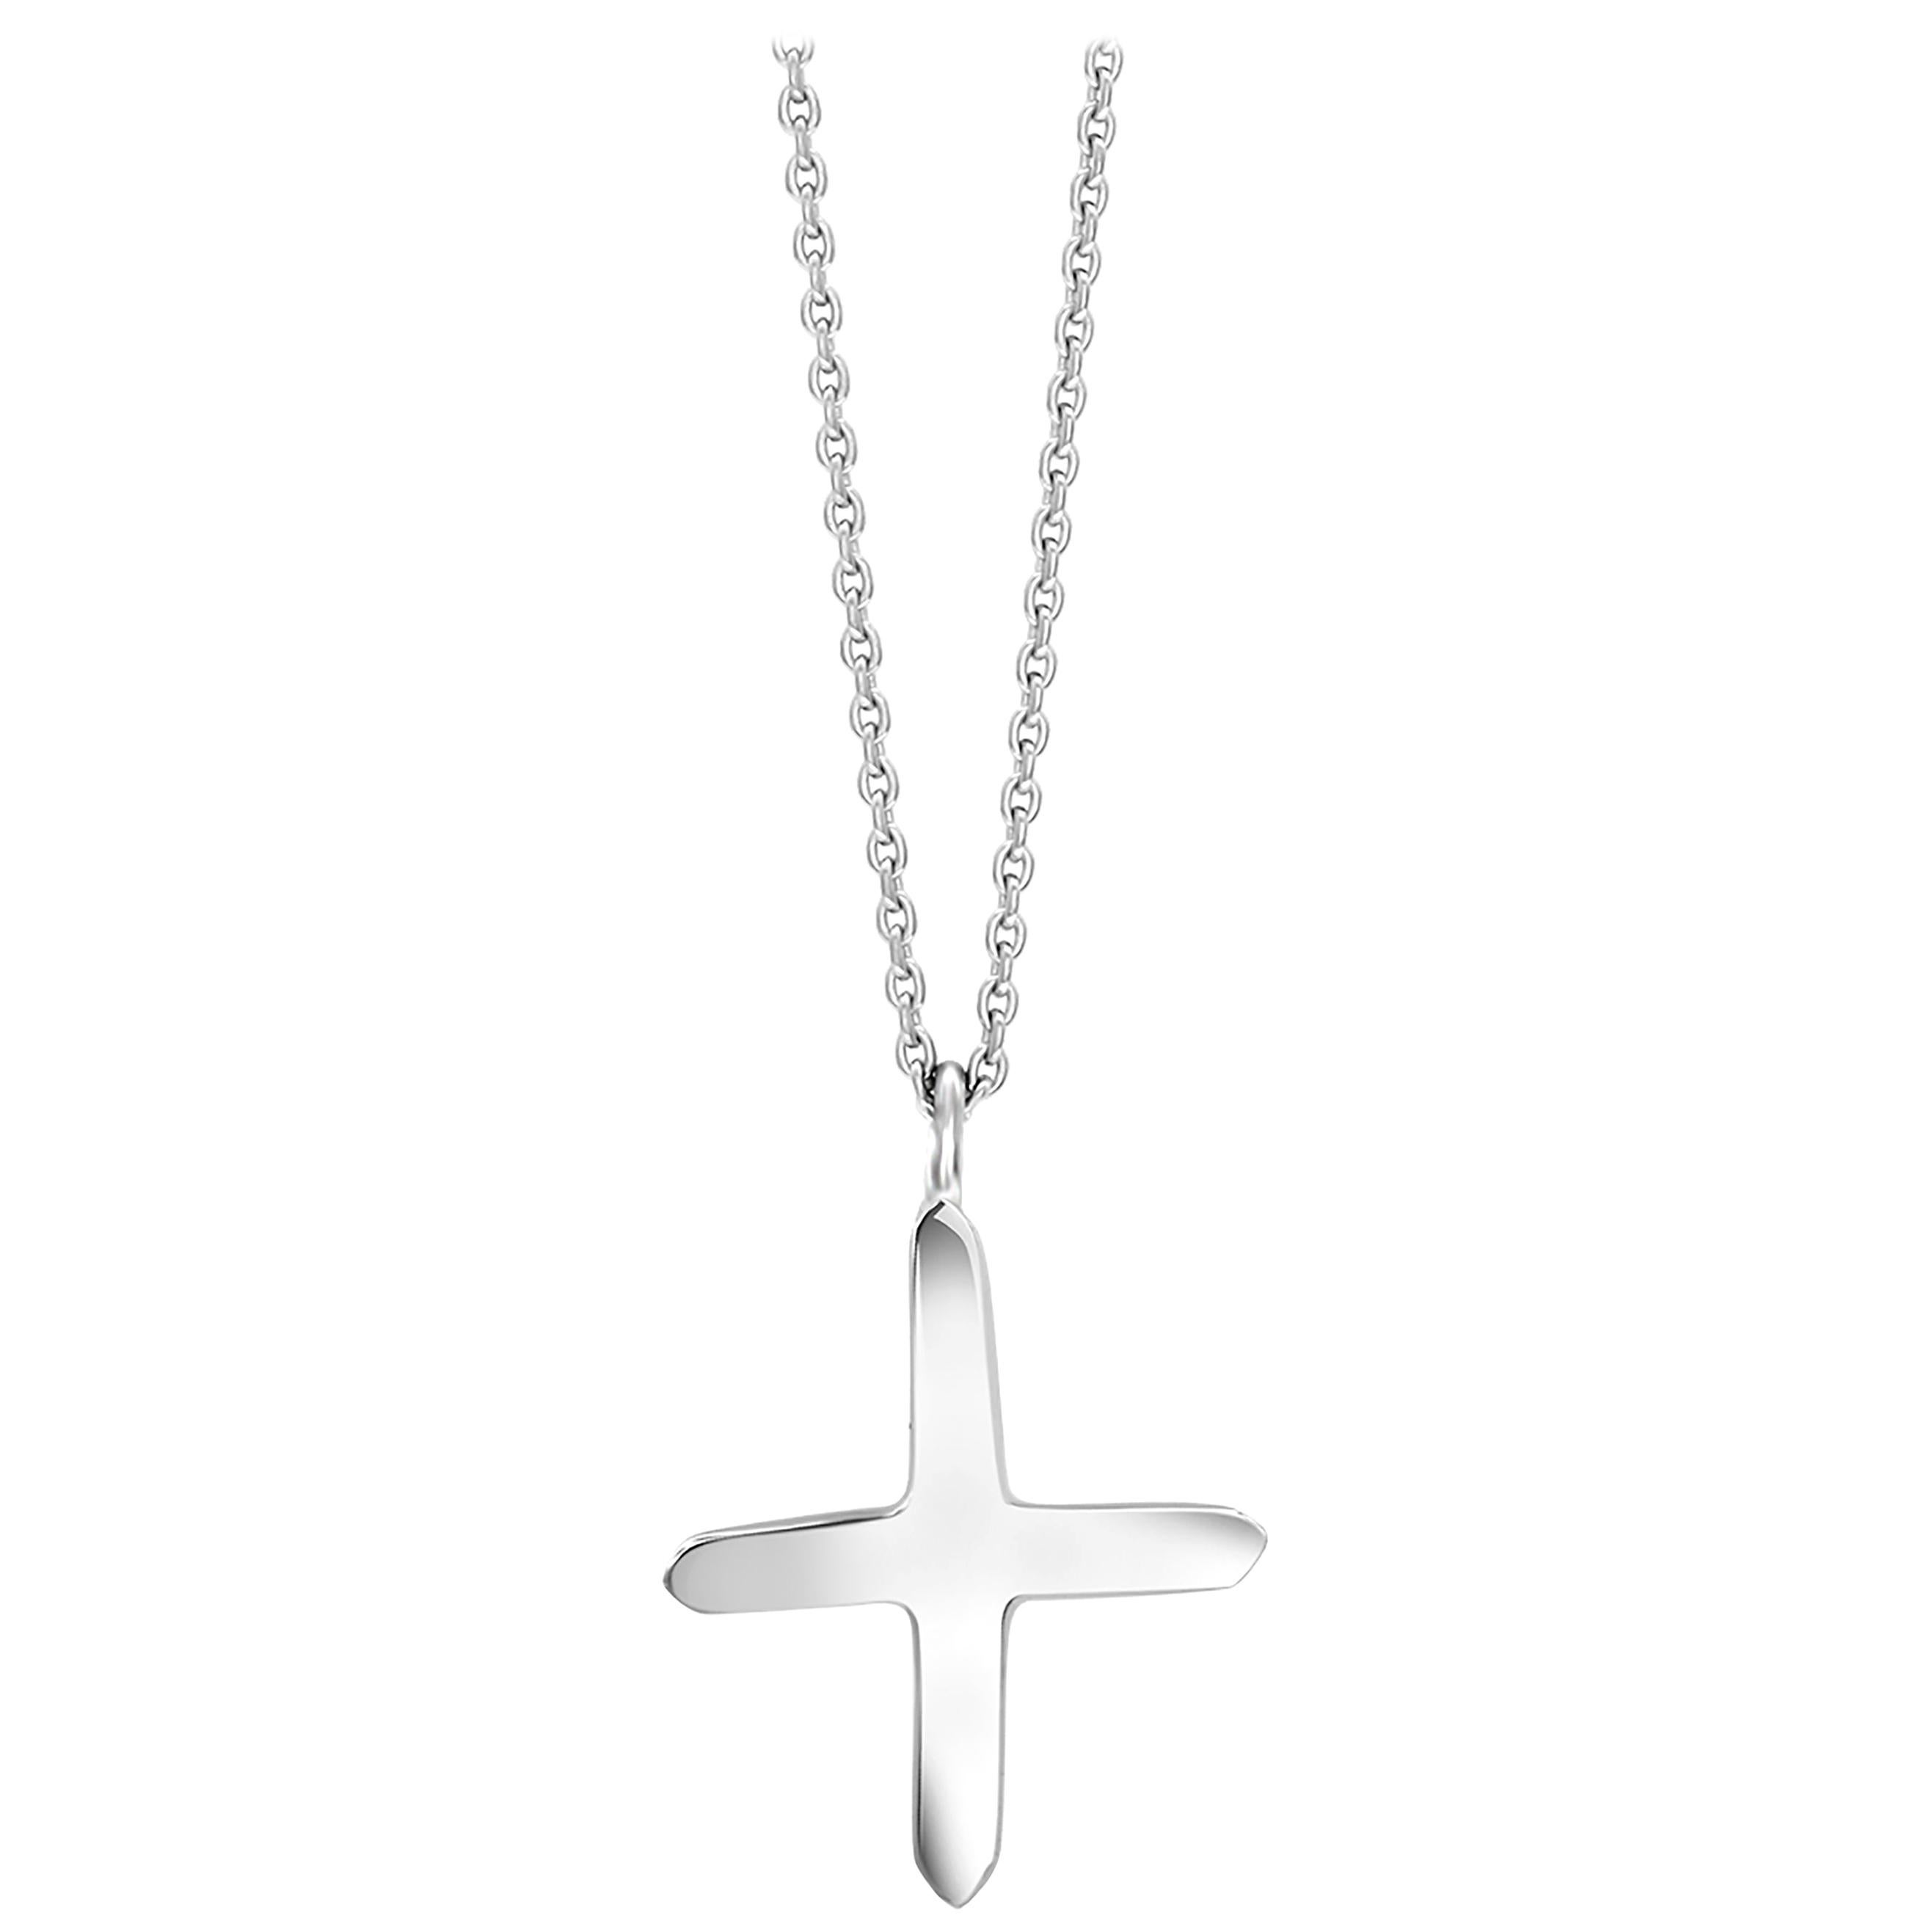 14 Karat White Gold Pendant Necklace with Cross Charm